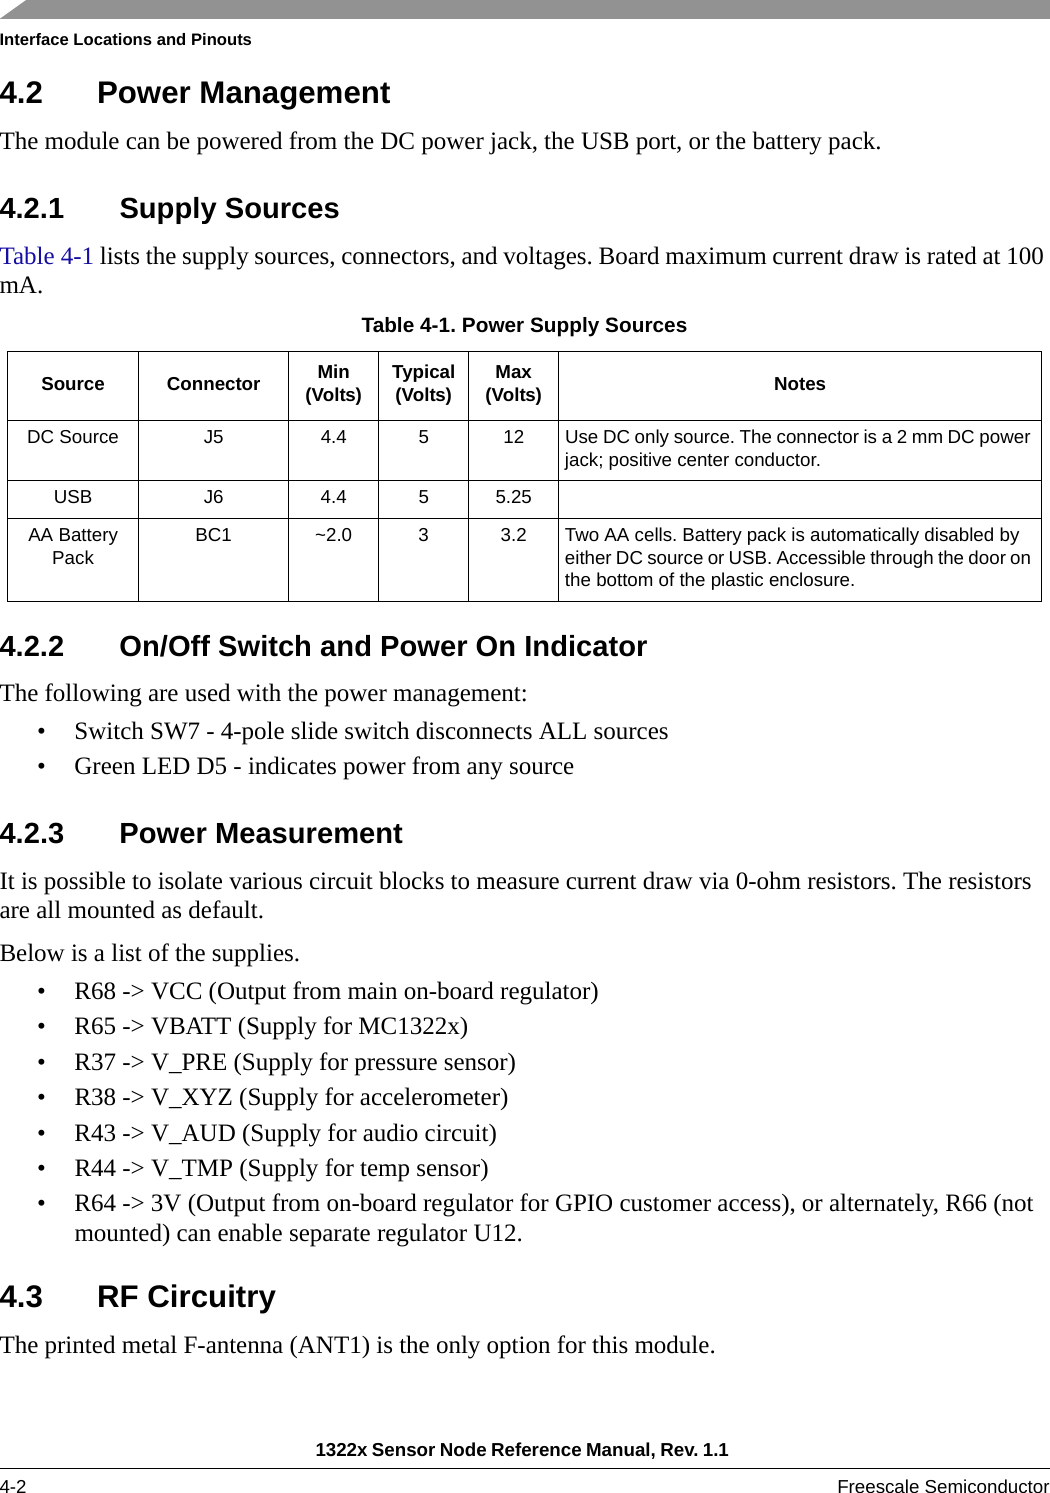 Interface Locations and Pinouts1322x Sensor Node Reference Manual, Rev. 1.1 4-2 Freescale Semiconductor4.2 Power ManagementThe module can be powered from the DC power jack, the USB port, or the battery pack.4.2.1 Supply SourcesTable 4-1 lists the supply sources, connectors, and voltages. Board maximum current draw is rated at 100 mA.4.2.2 On/Off Switch and Power On IndicatorThe following are used with the power management:• Switch SW7 - 4-pole slide switch disconnects ALL sources• Green LED D5 - indicates power from any source4.2.3 Power MeasurementIt is possible to isolate various circuit blocks to measure current draw via 0-ohm resistors. The resistors are all mounted as default.Below is a list of the supplies.• R68 -&gt; VCC (Output from main on-board regulator)• R65 -&gt; VBATT (Supply for MC1322x)• R37 -&gt; V_PRE (Supply for pressure sensor)• R38 -&gt; V_XYZ (Supply for accelerometer)• R43 -&gt; V_AUD (Supply for audio circuit)• R44 -&gt; V_TMP (Supply for temp sensor)• R64 -&gt; 3V (Output from on-board regulator for GPIO customer access), or alternately, R66 (not mounted) can enable separate regulator U12.4.3 RF CircuitryThe printed metal F-antenna (ANT1) is the only option for this module.Table 4-1. Power Supply SourcesSource Connector Min(Volts) Typical(Volts) Max(Volts) NotesDC Source J5 4.4 5 12 Use DC only source. The connector is a 2 mm DC power jack; positive center conductor.USB J6 4.4 5 5.25AA Battery Pack BC1 ~2.0 3 3.2 Two AA cells. Battery pack is automatically disabled by either DC source or USB. Accessible through the door on the bottom of the plastic enclosure.